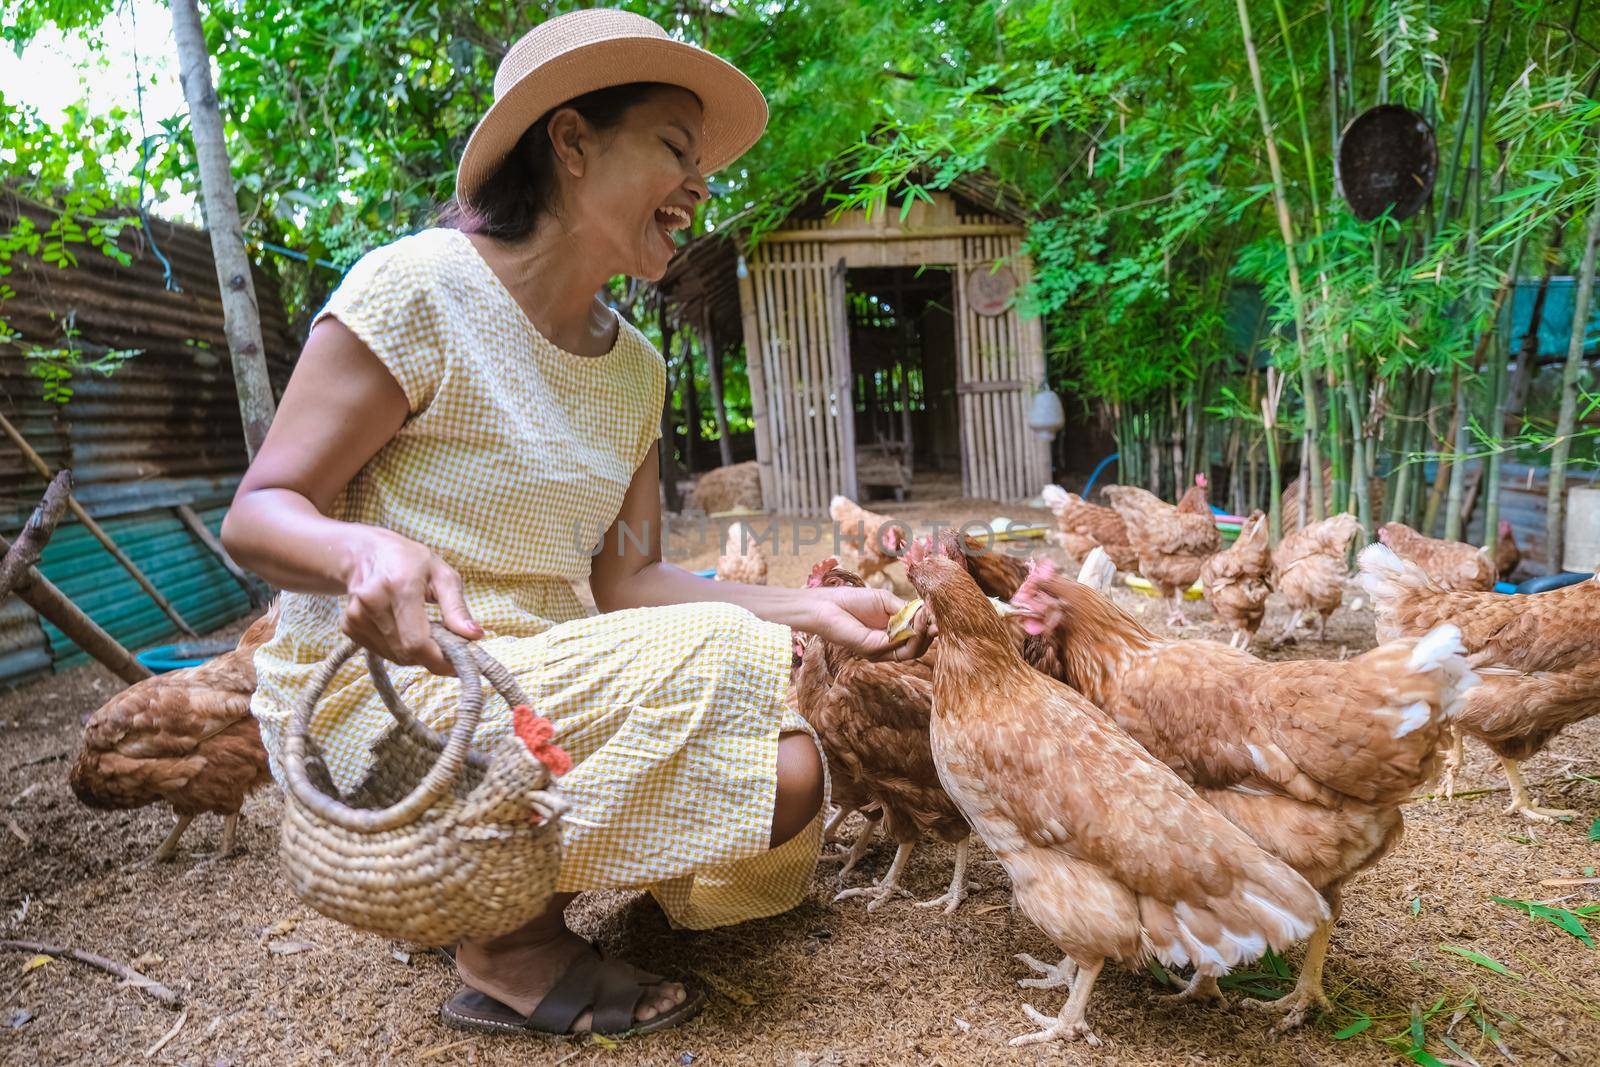 Asian women at an Eco farm homestay feeding chicken at a farm in Thailand. Asian woman with hat at a homestay farm in Thailand feeding chicken